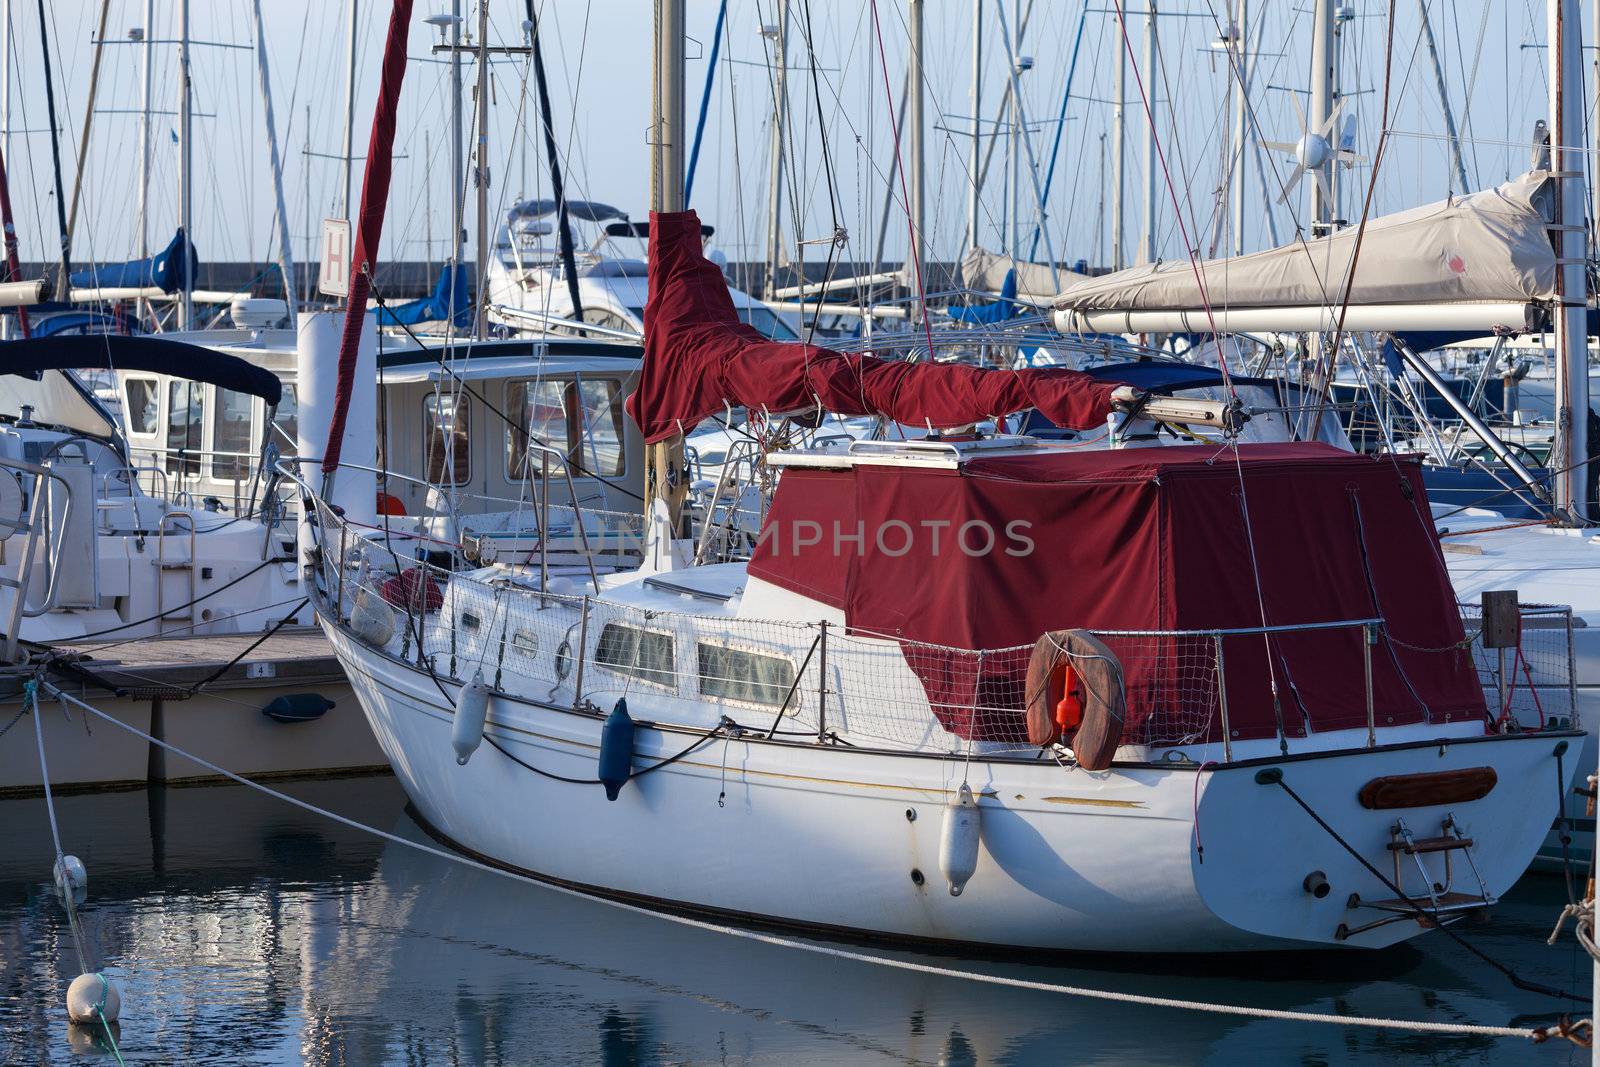 Yachts moored in a marina by Discovod